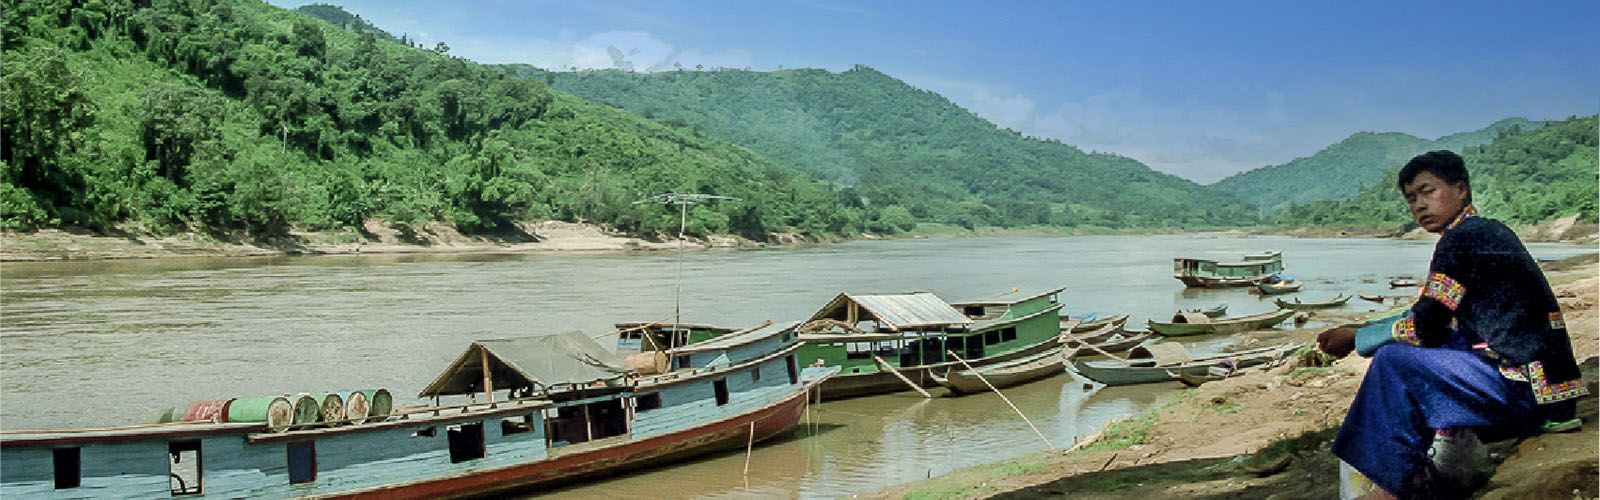 Laos Overview 